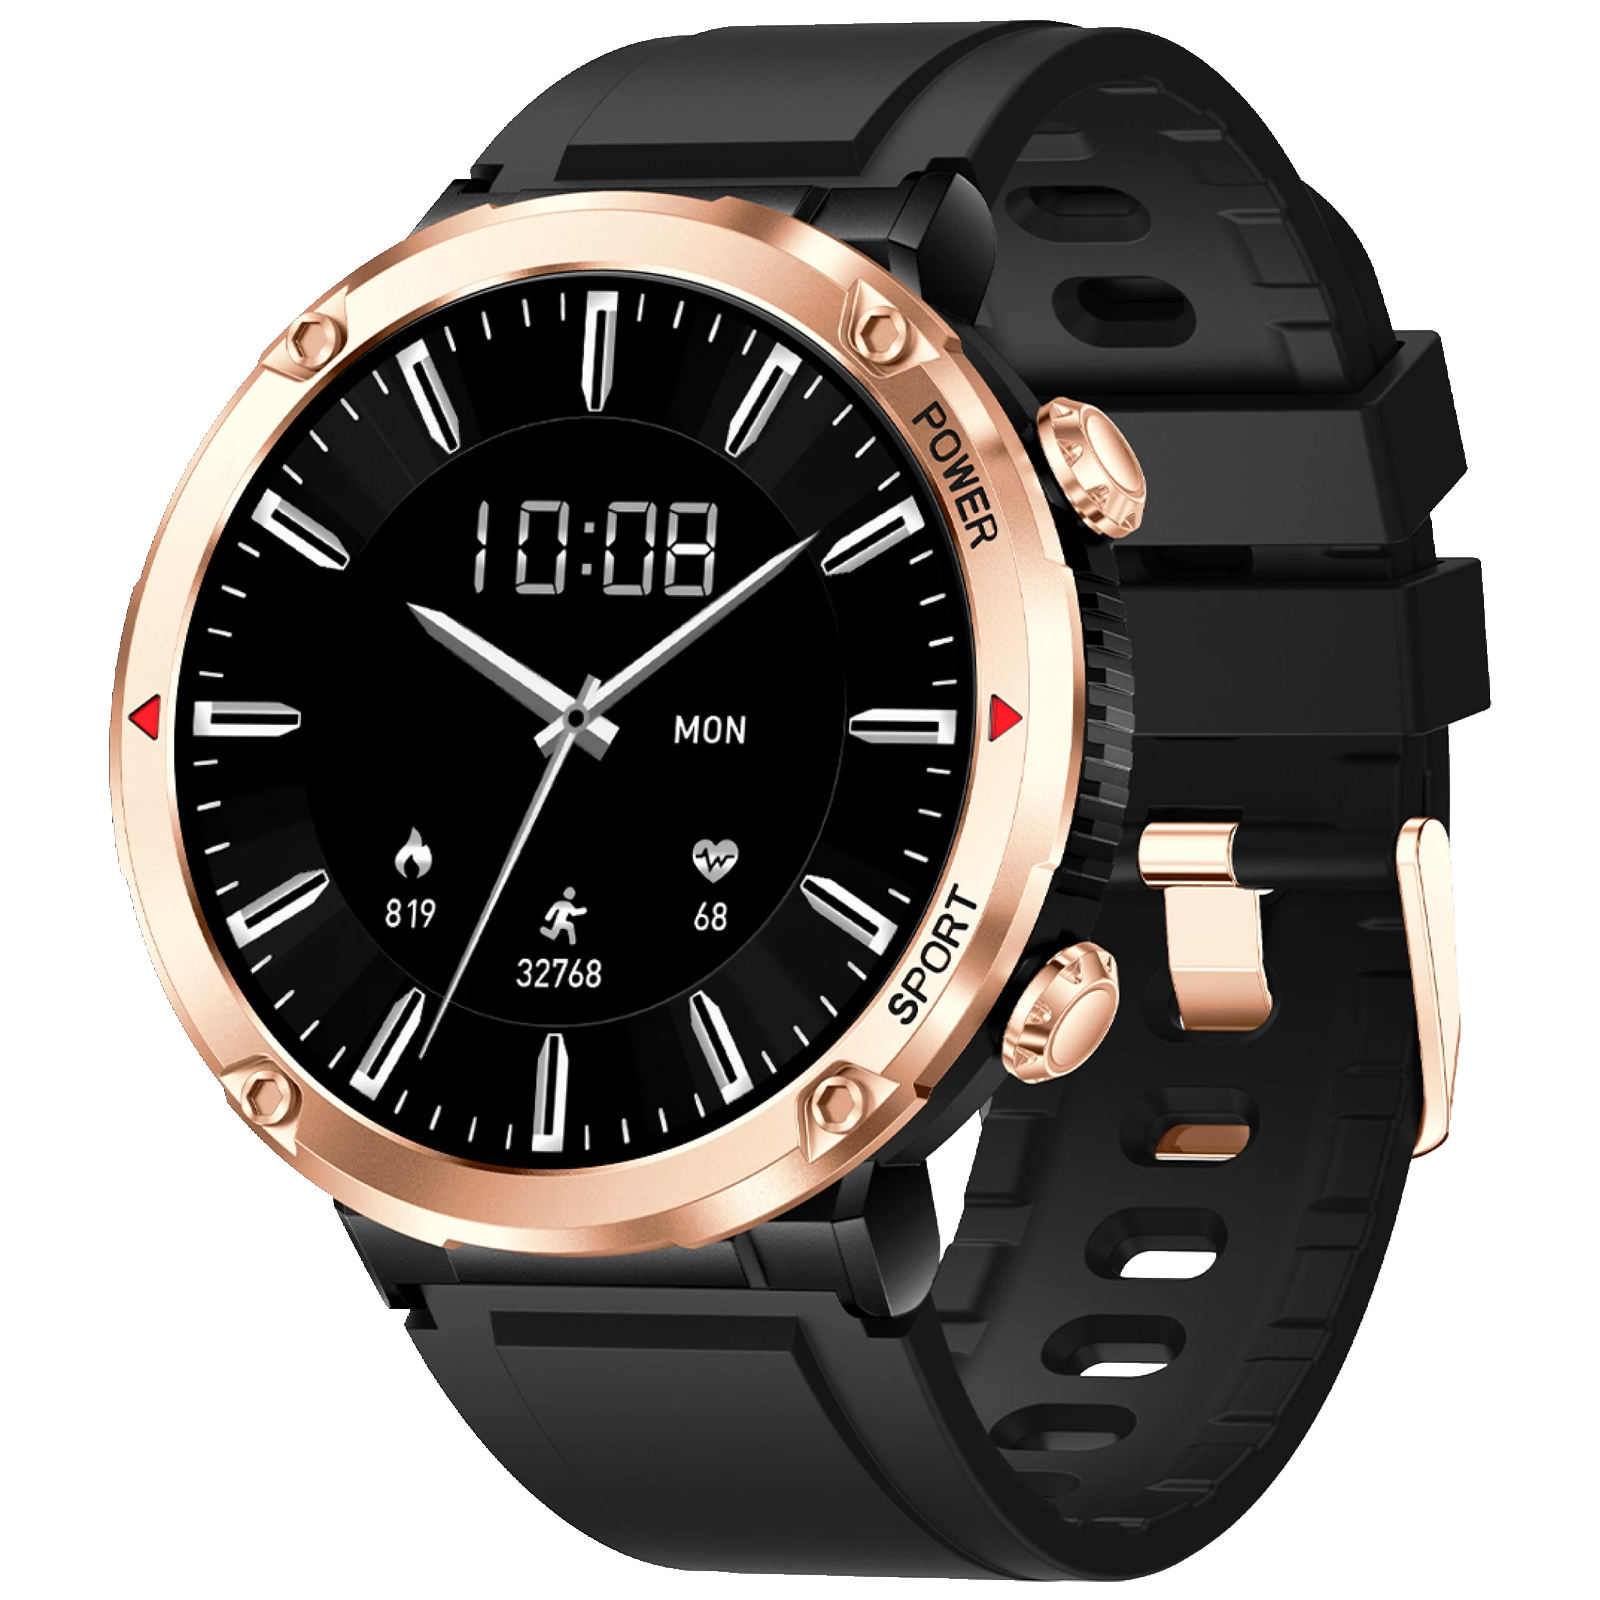 FIRE-BOLTT Sphere Smartwatch with Bluetooth Calling (40.6mm HD Display, IP68 Water Resistant, Black Strap)